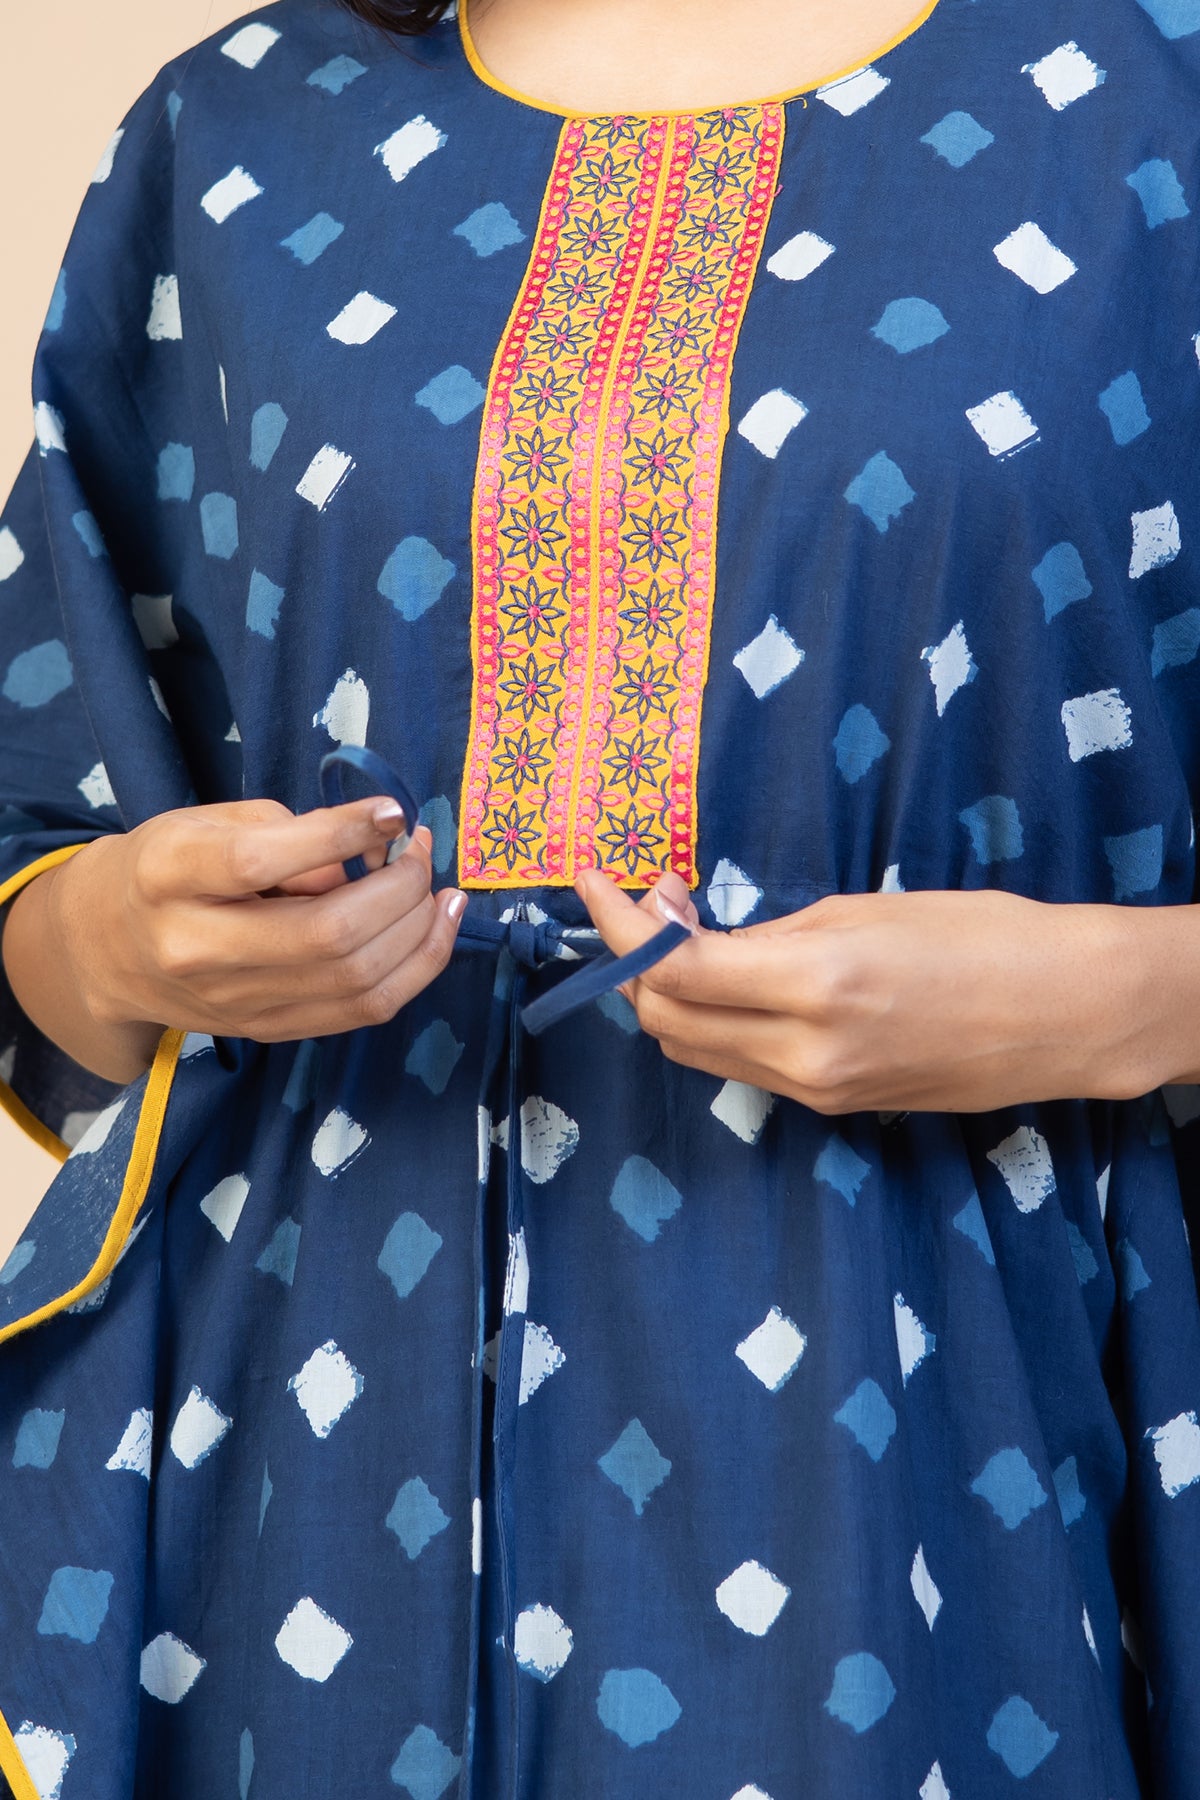 All Over Geometric Printed With Floral Embroidered Yoke Kaftan Nighty - Blue